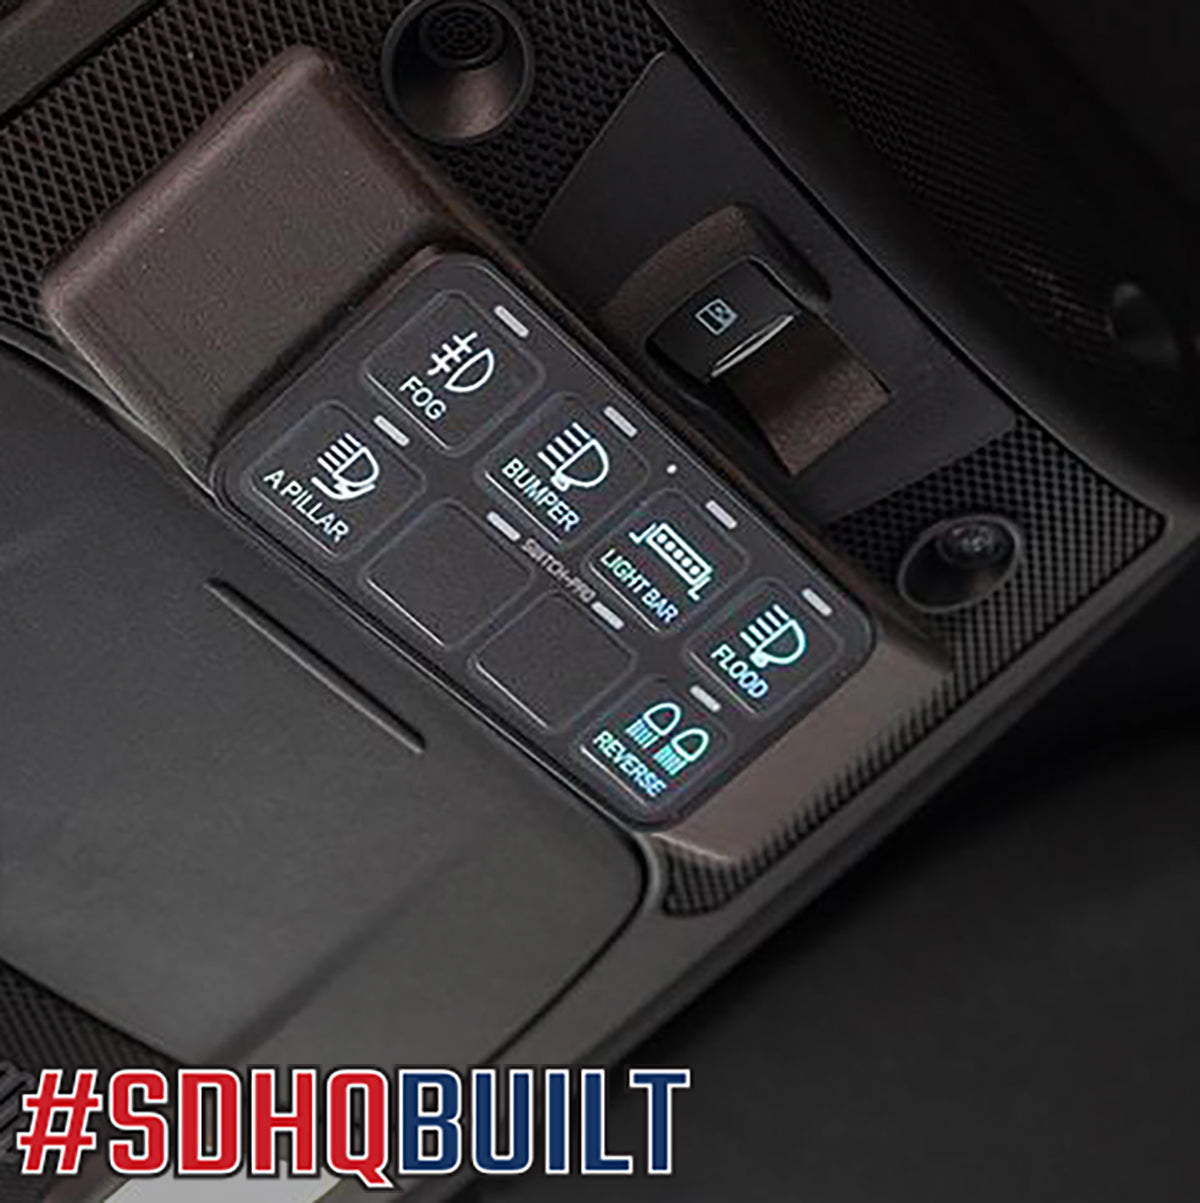 '17-22 Ford F250/350 SDHQ Built Complete Switch Pros Mounting Kit